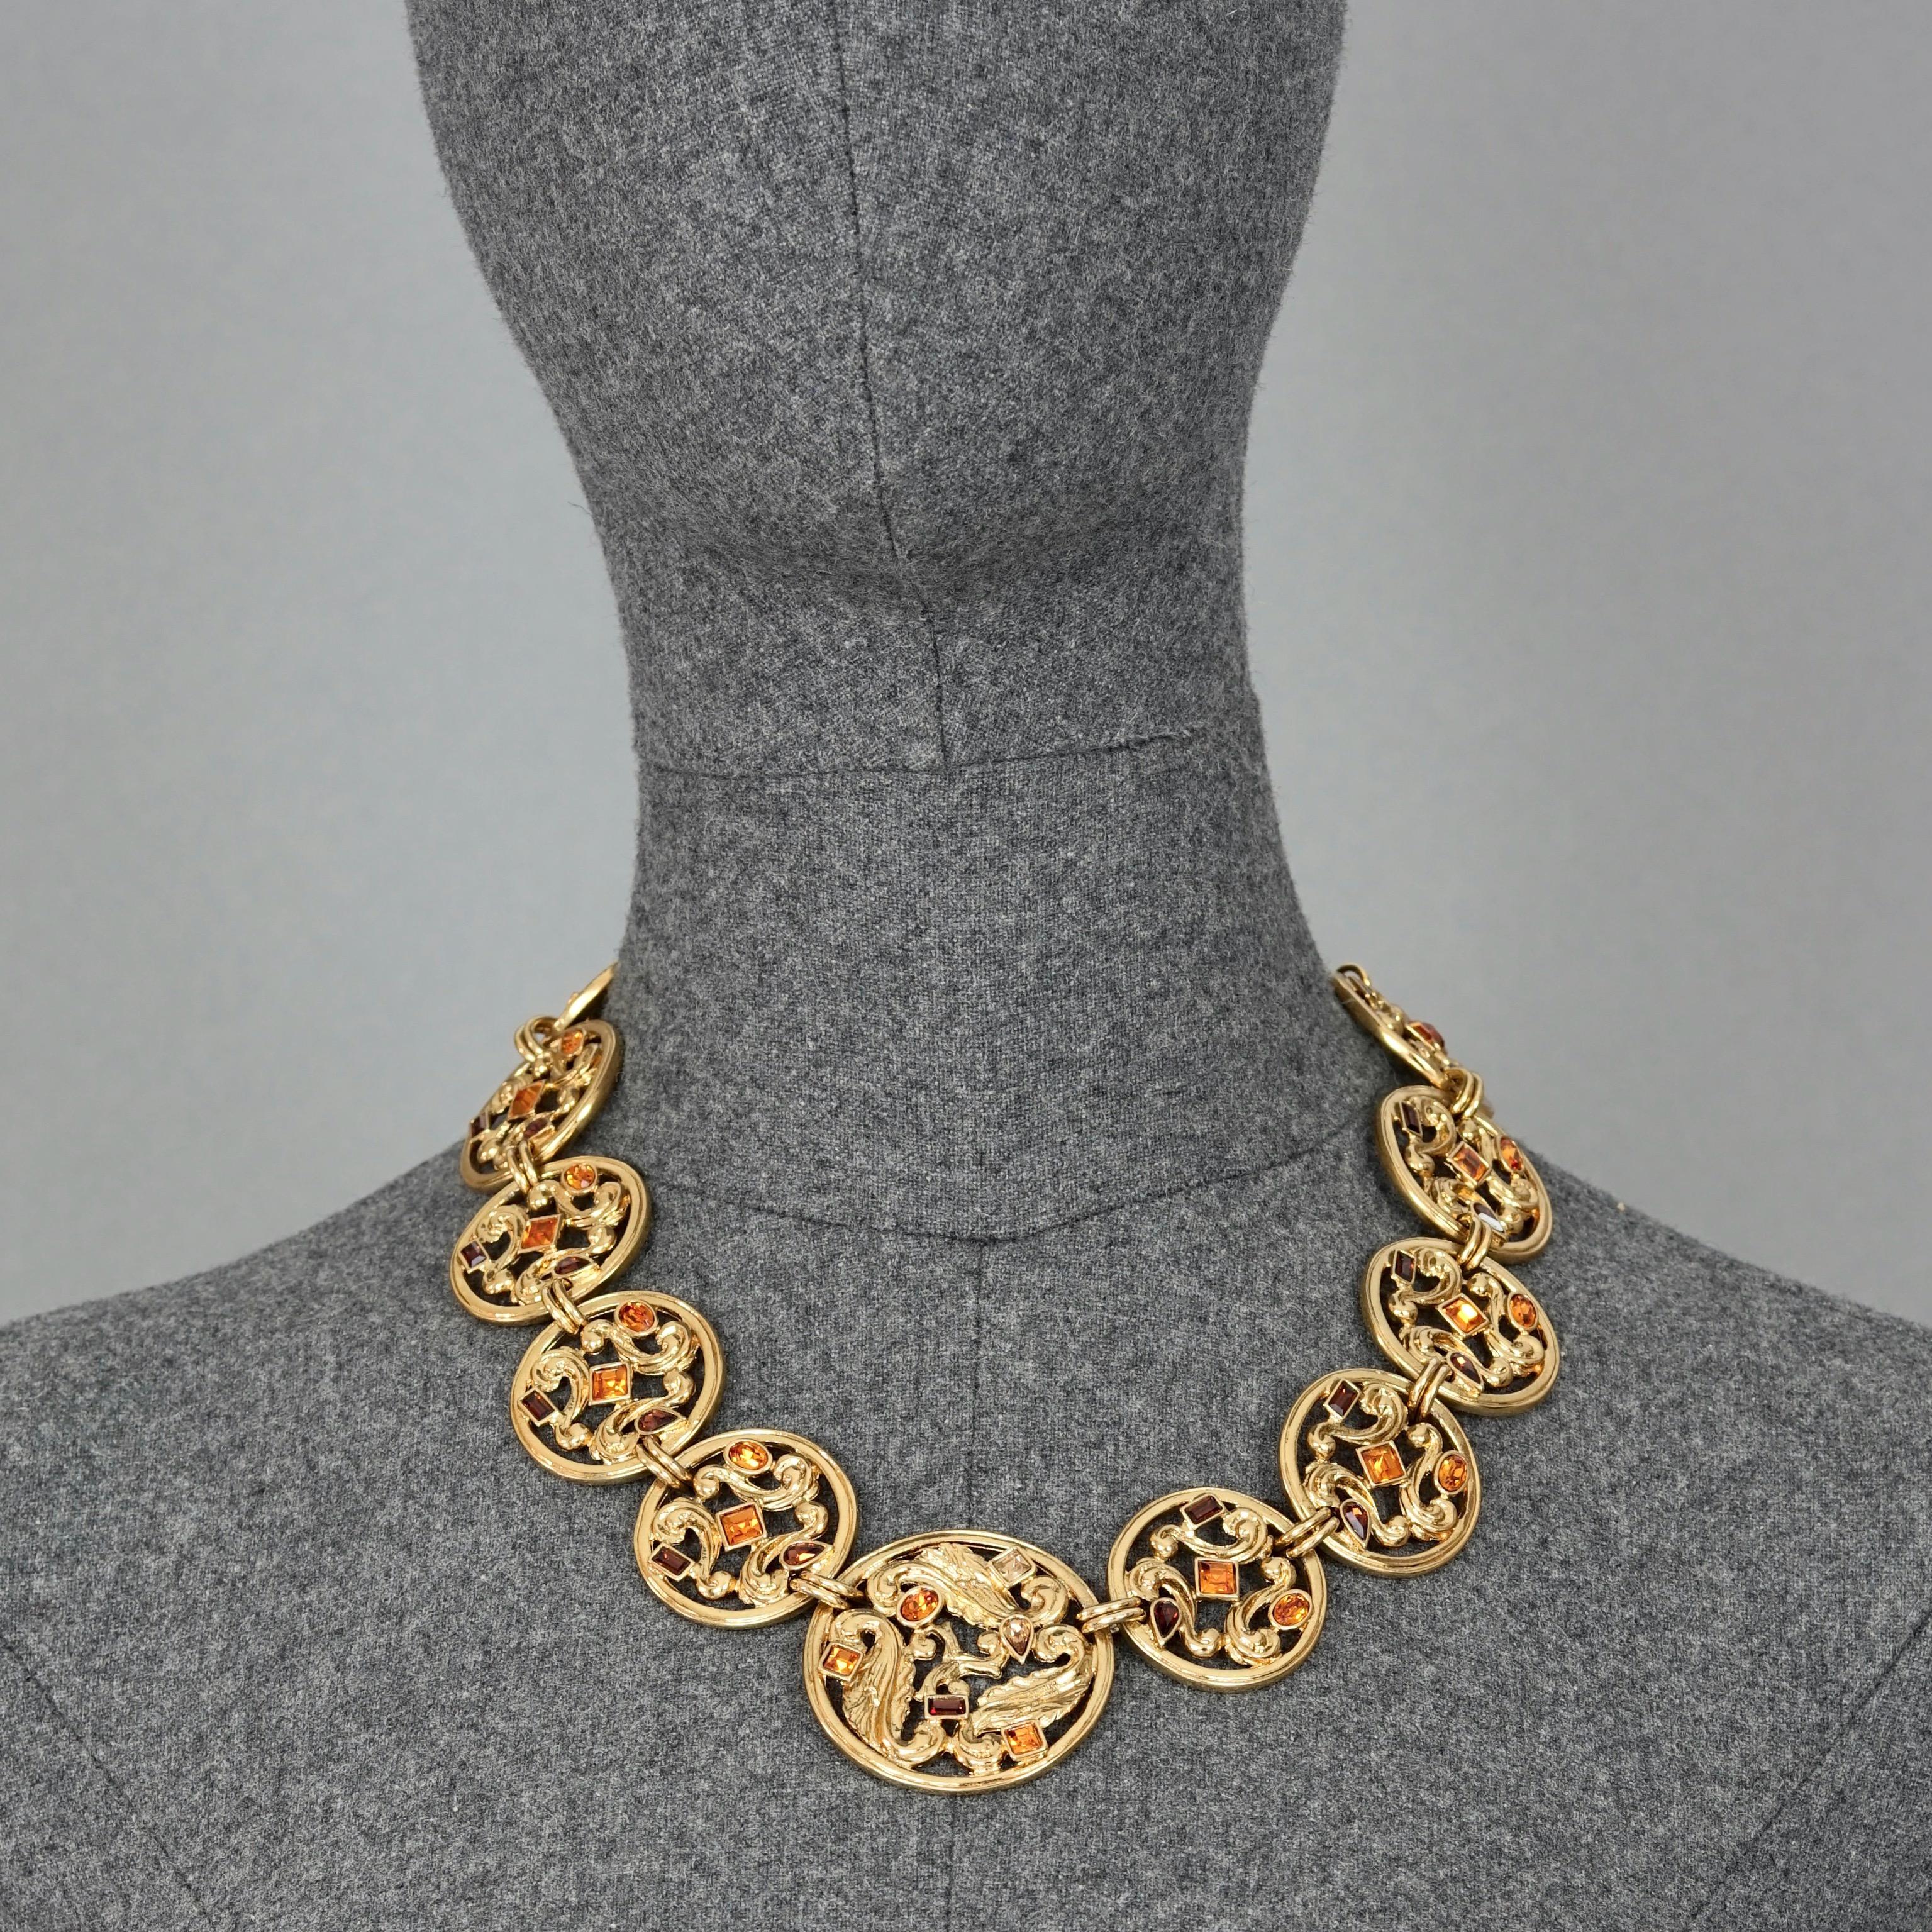 Vintage YVES SAINT LAURENT Ysl Jewelled Round Filigree Disc Necklace For Sale 2